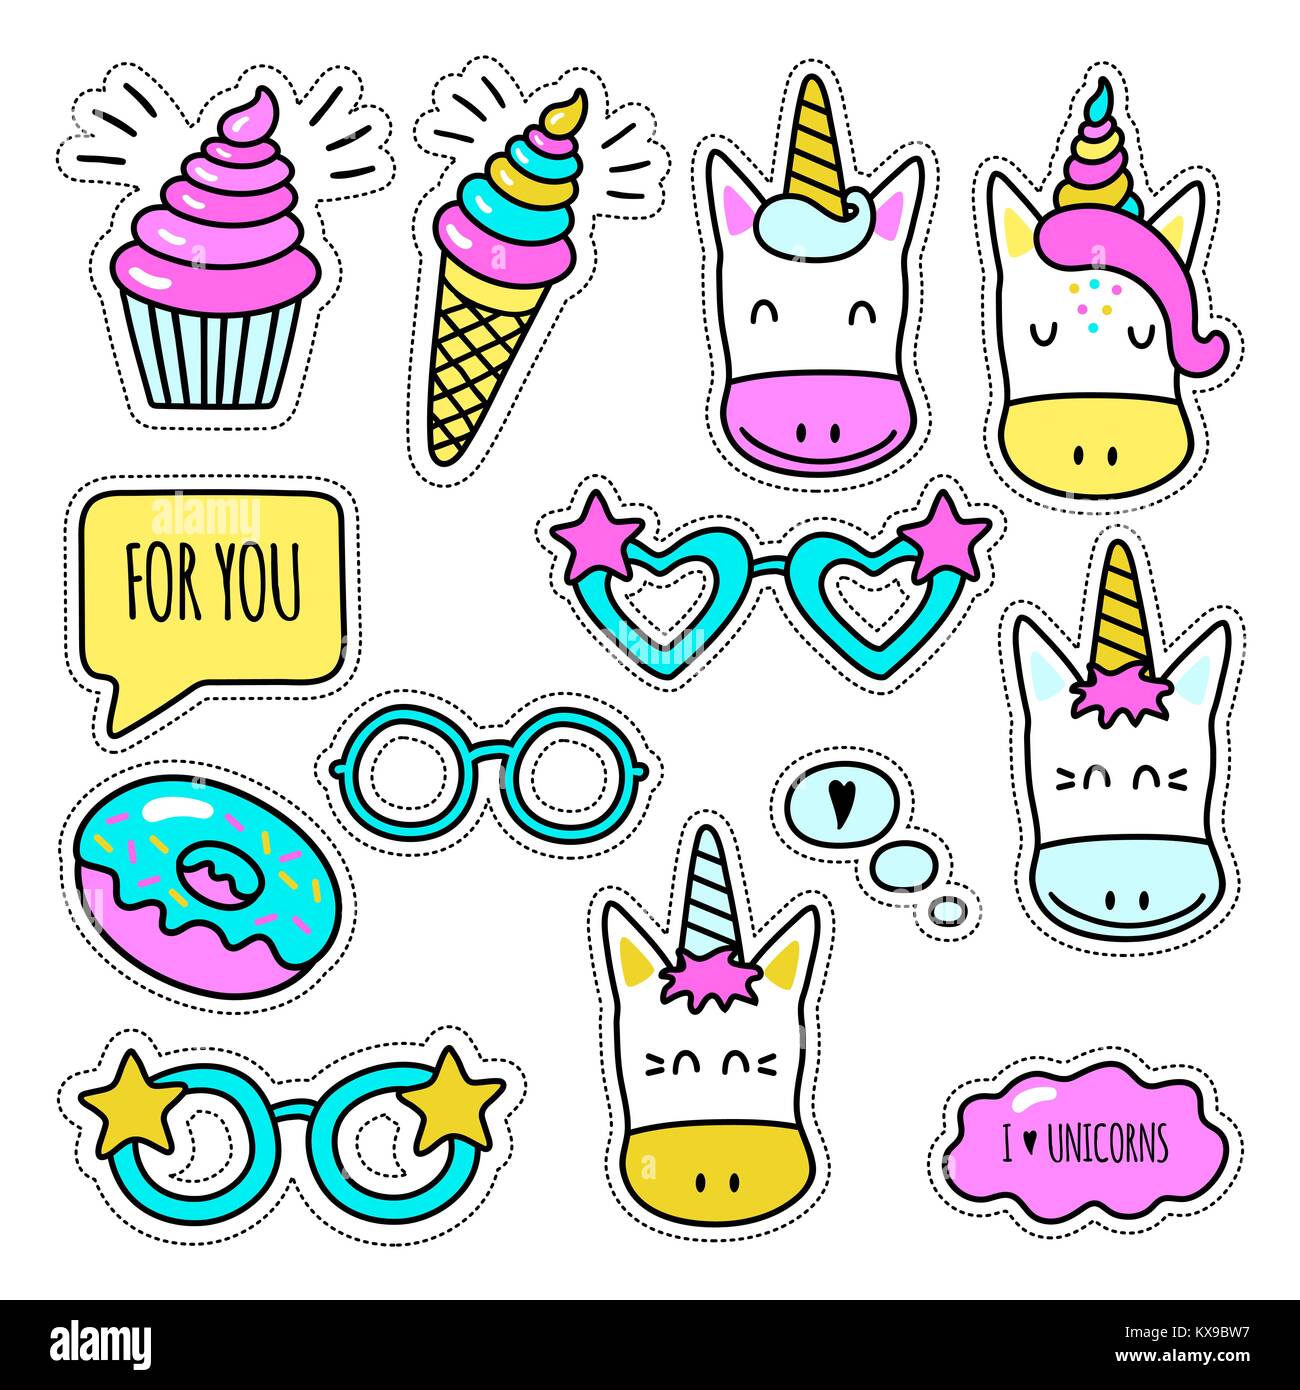 Set of colored unicorn stickers isolated on white background Stock Vector